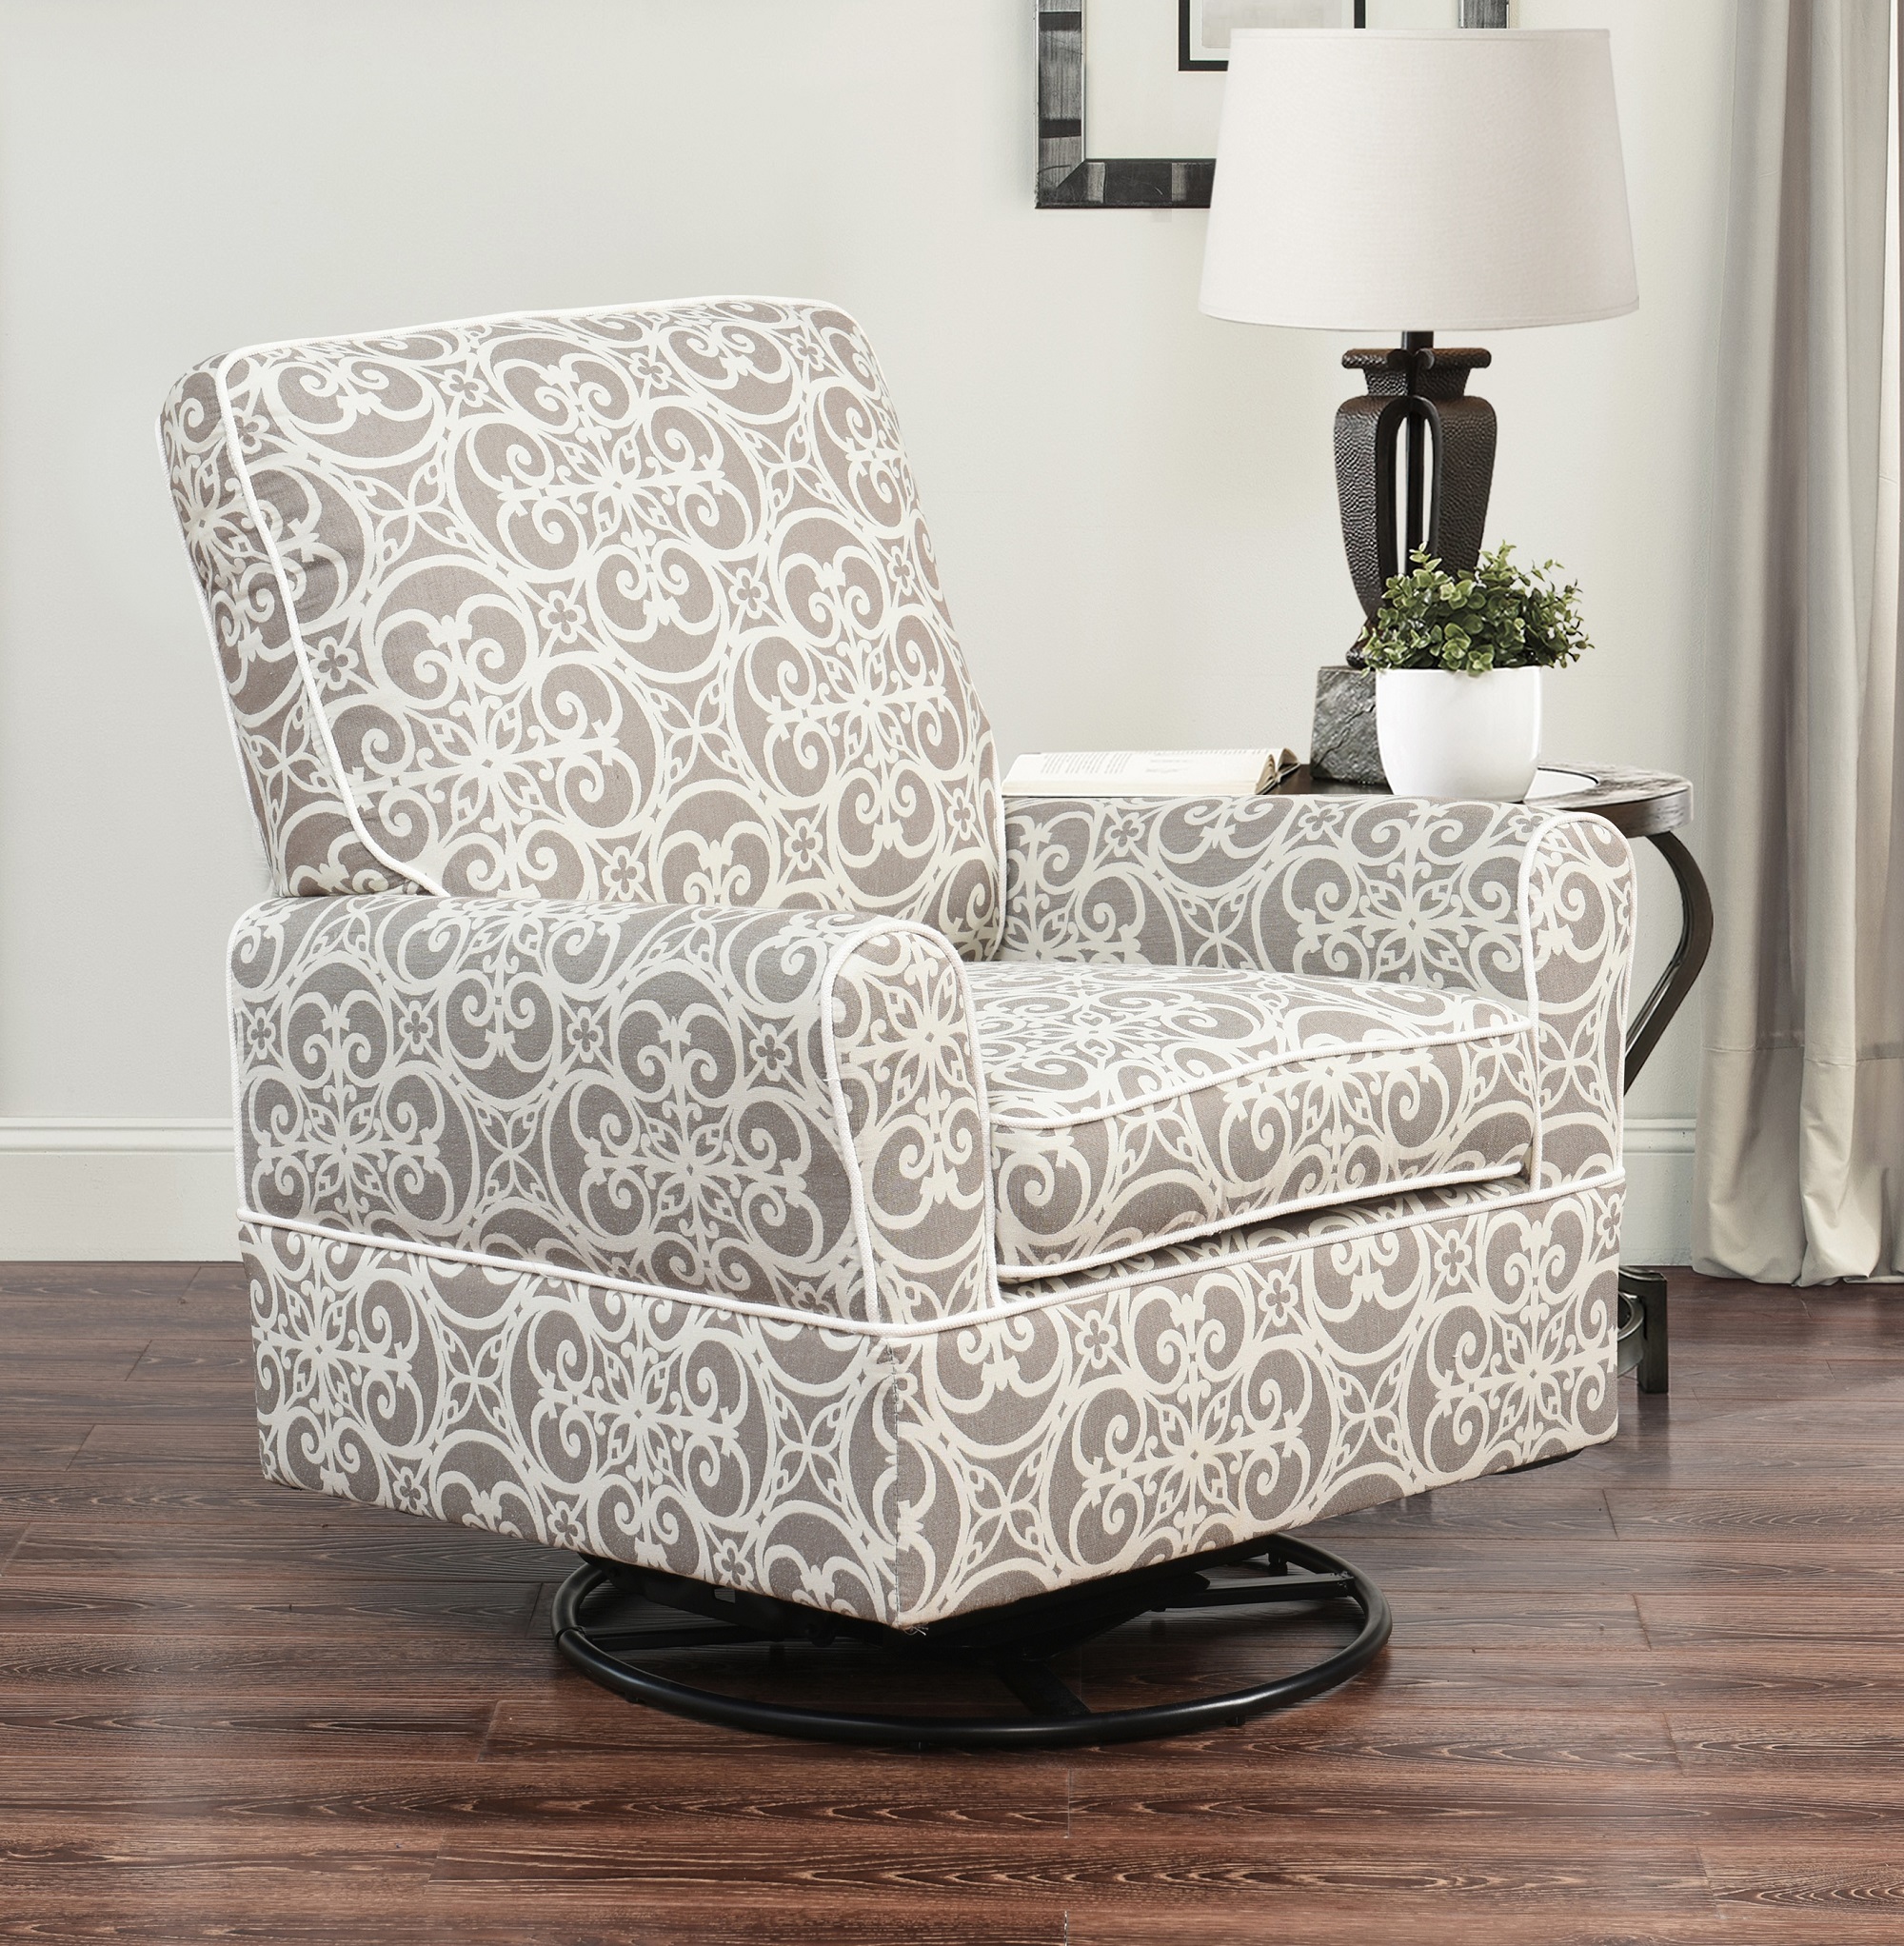 Chase Swivel Glider Chair and Gliding Ottoman - image 3 of 4